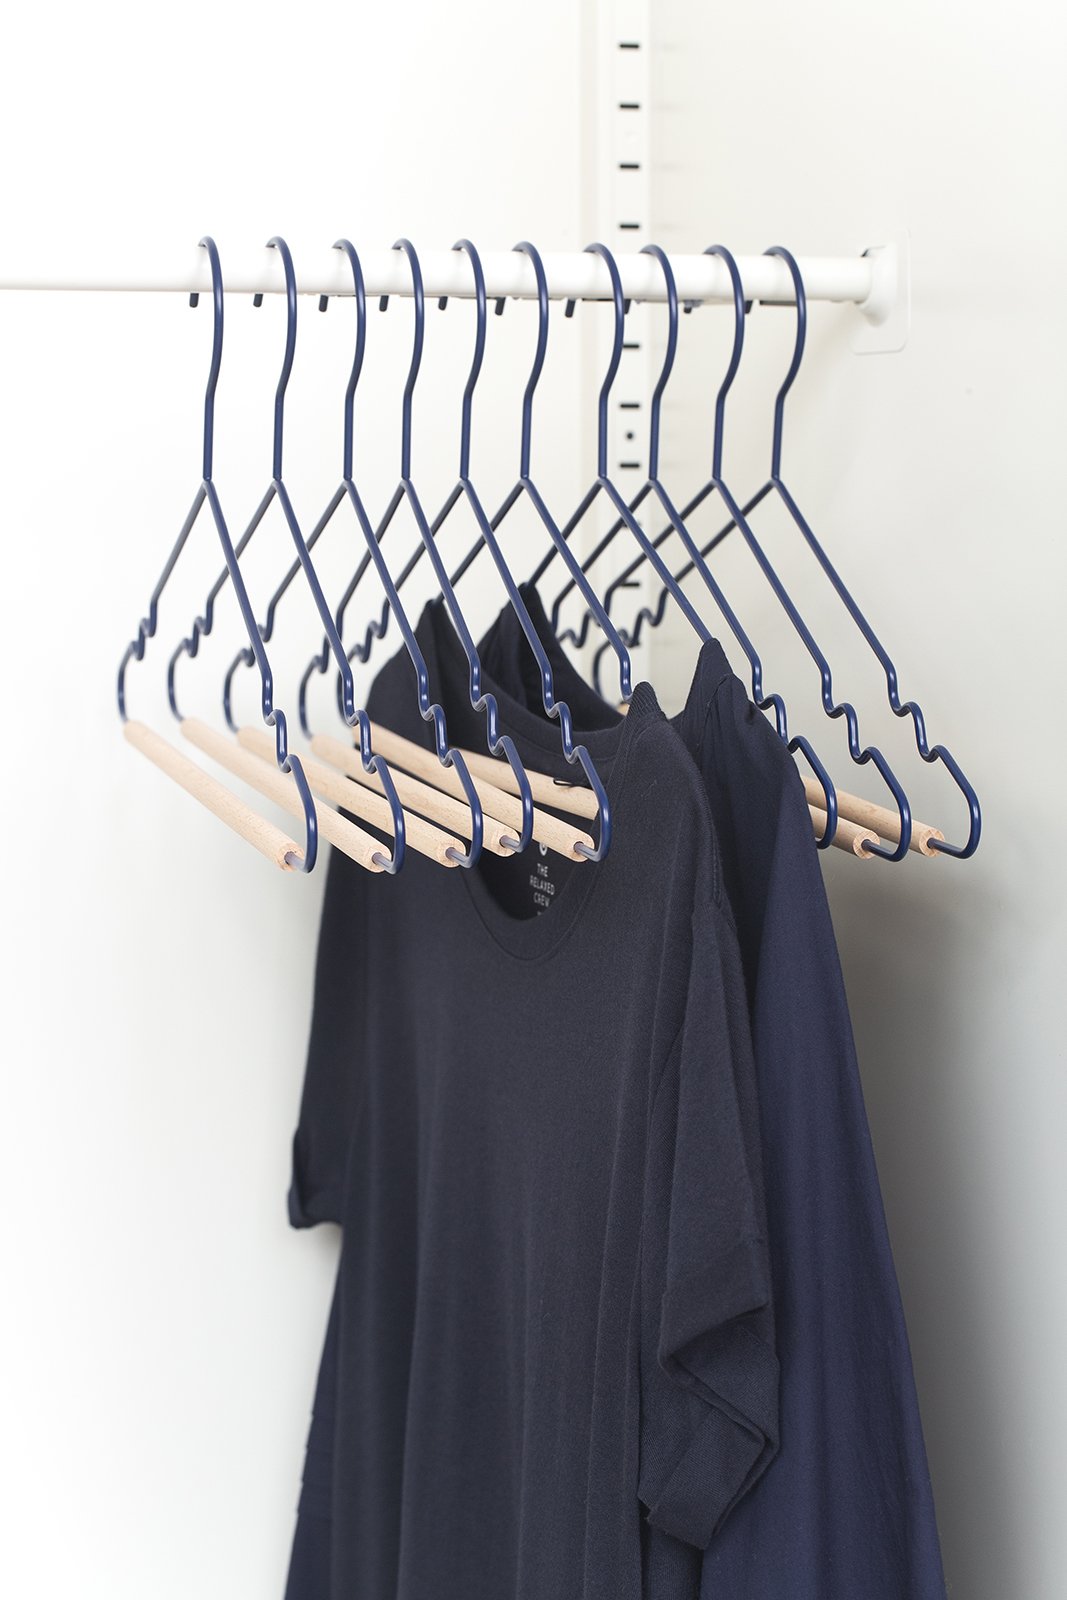 Mustard Made Adult Top Hangers in Navy Pack of 10